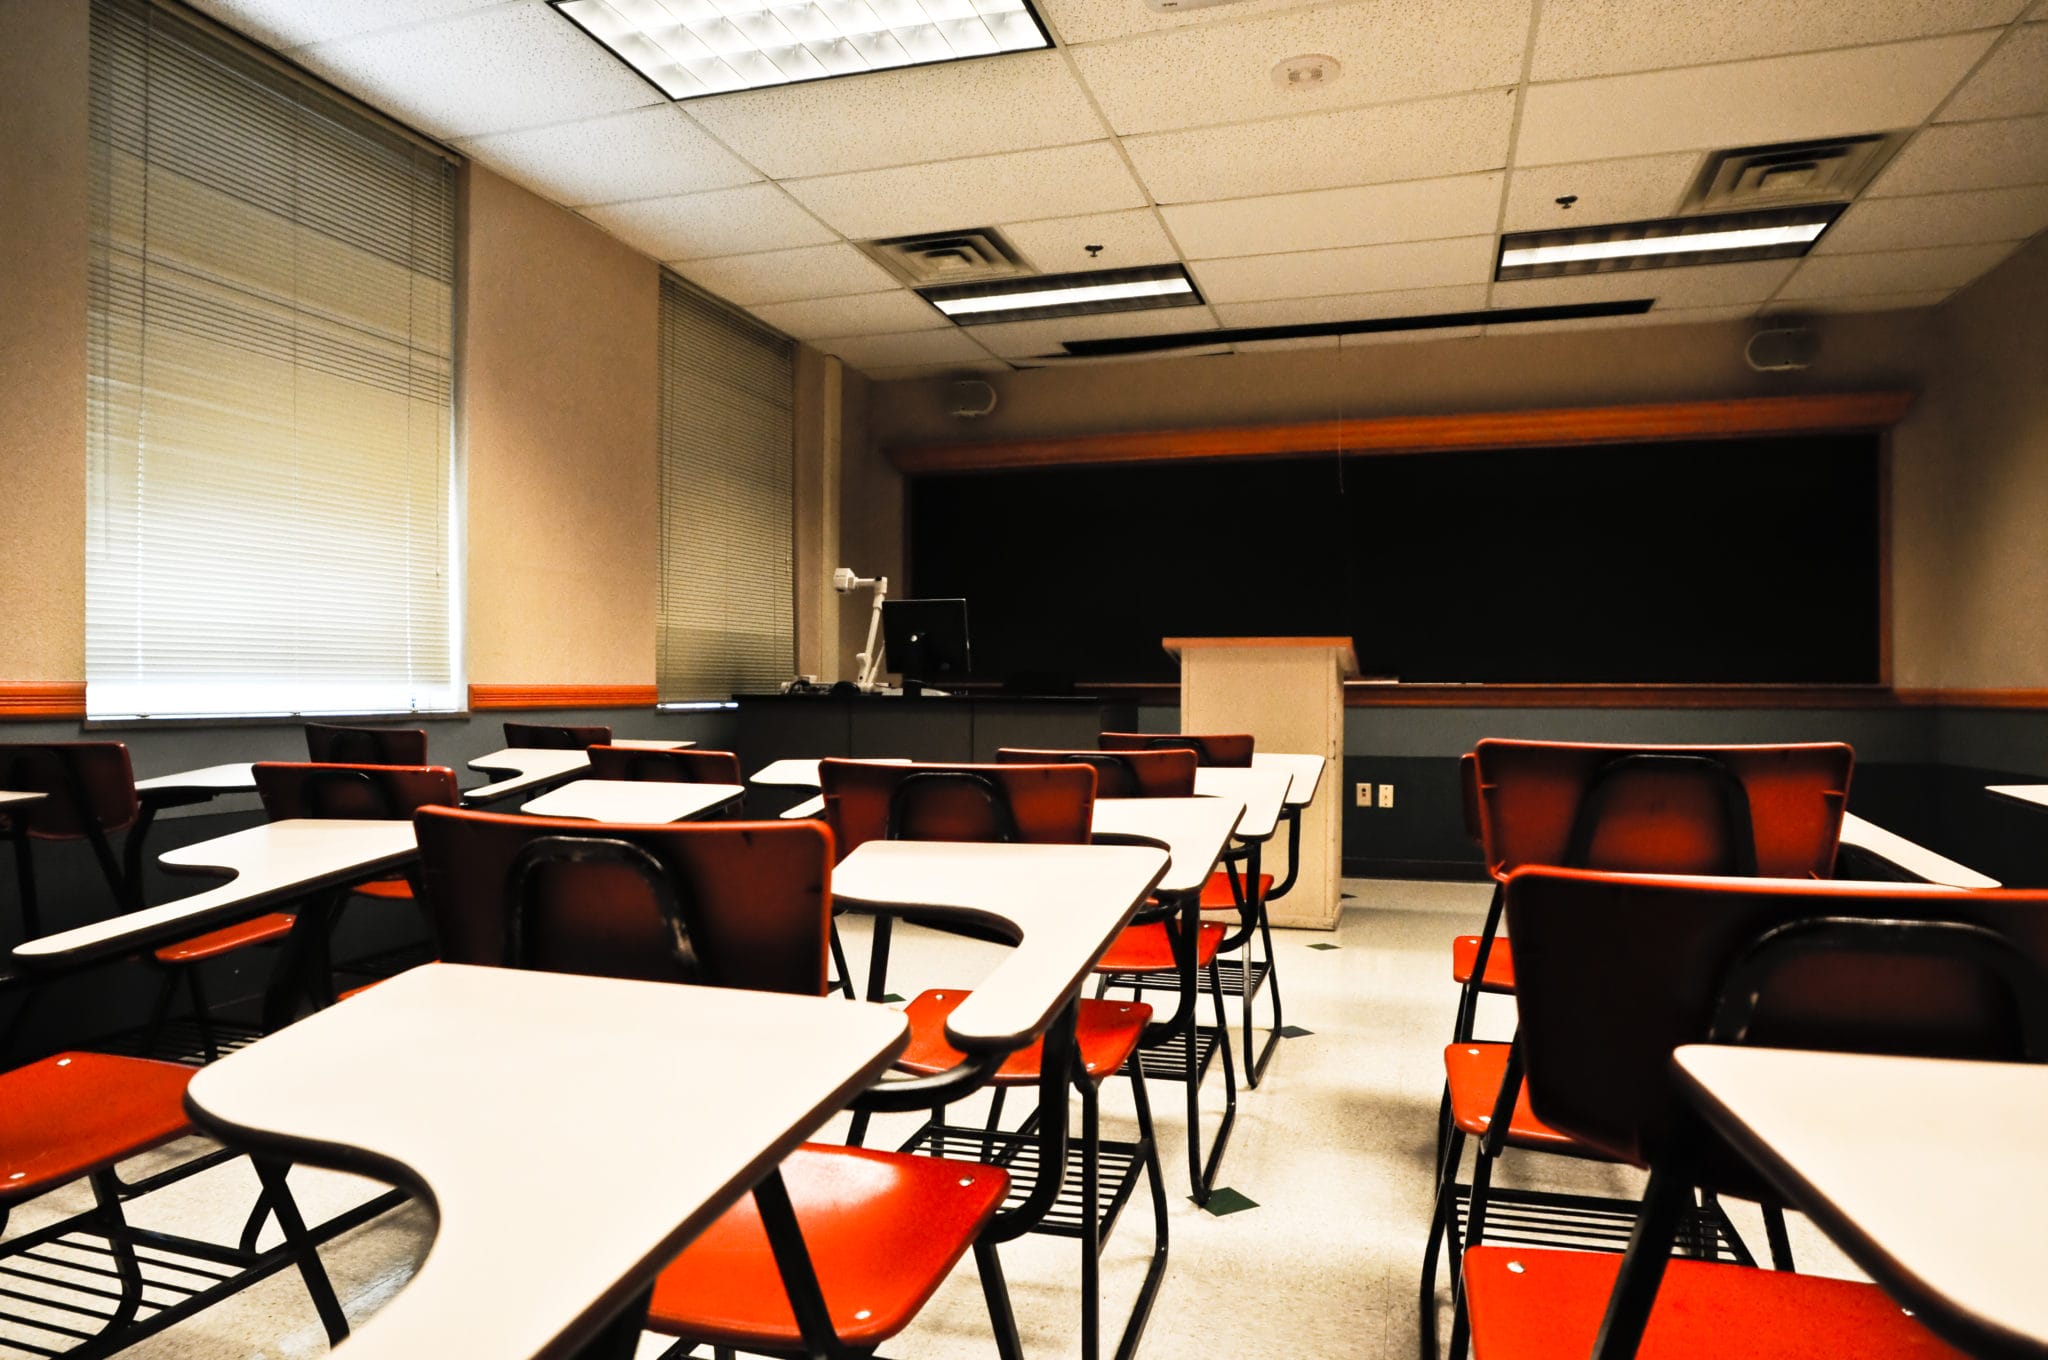 Empty classroom with rows of desks and chairs facing a blackboard, under bright artificial lighting.